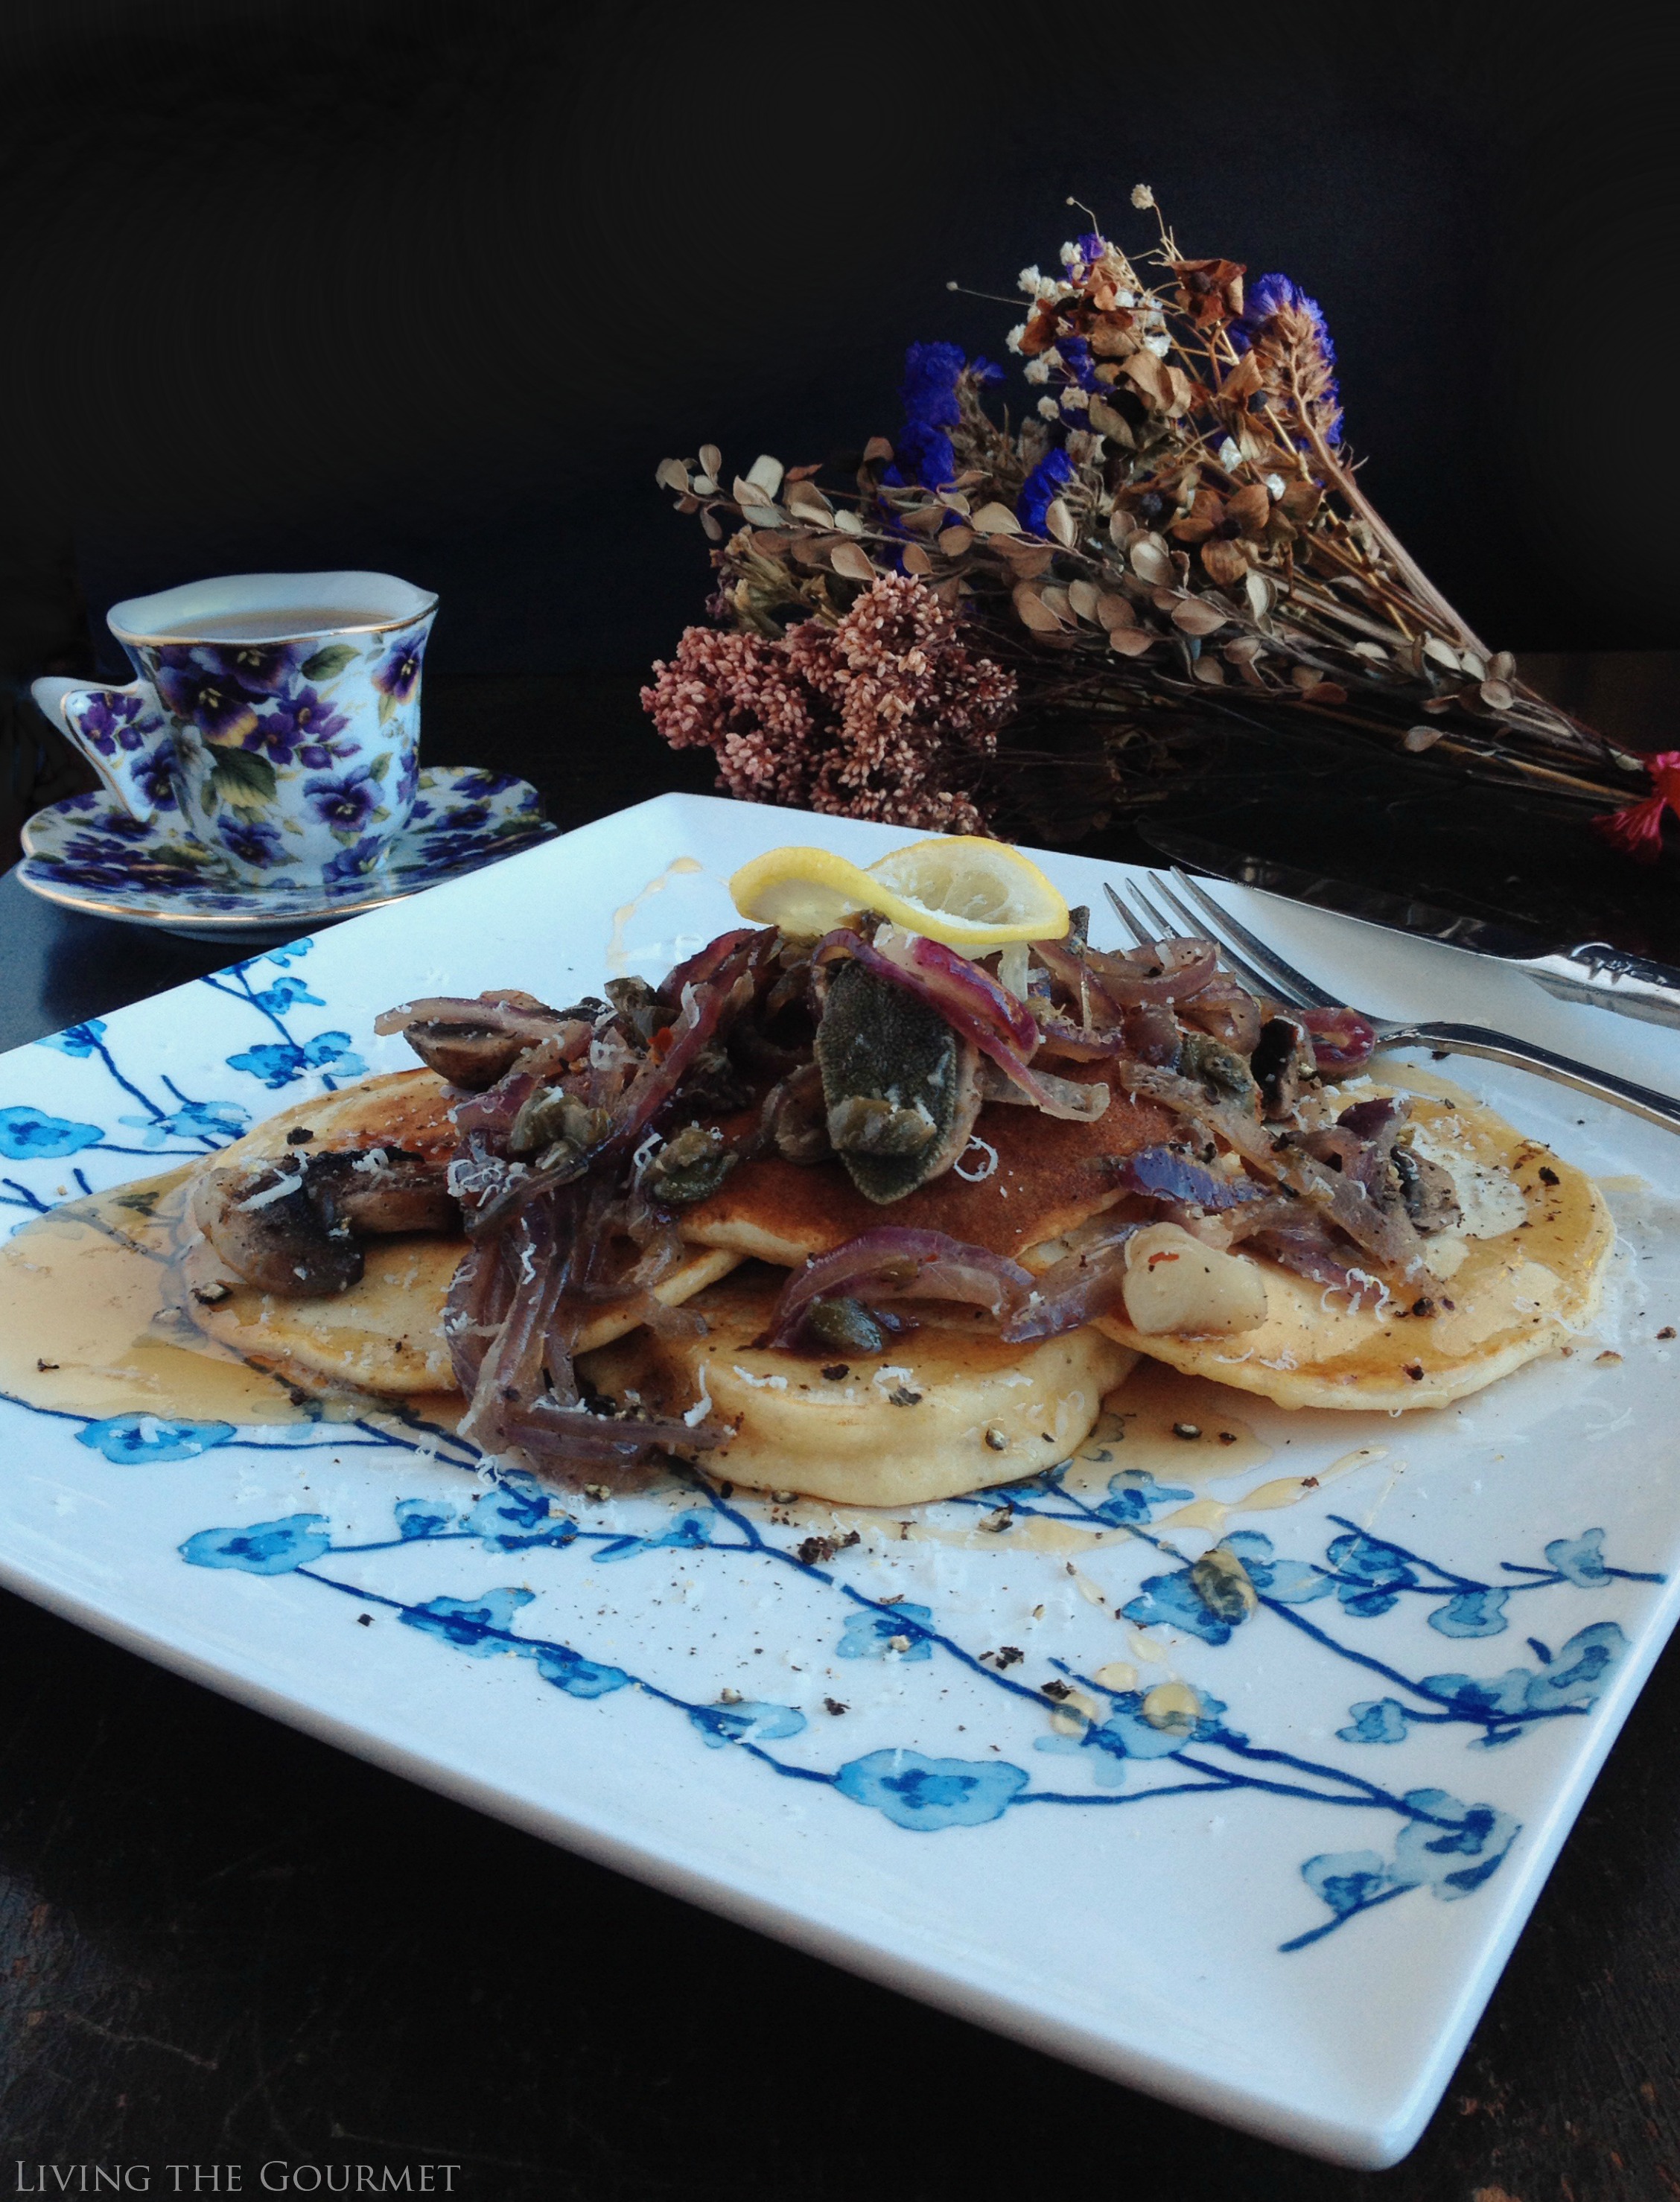 Polenta pancakes and sauteed mushrooms with caramelized onions